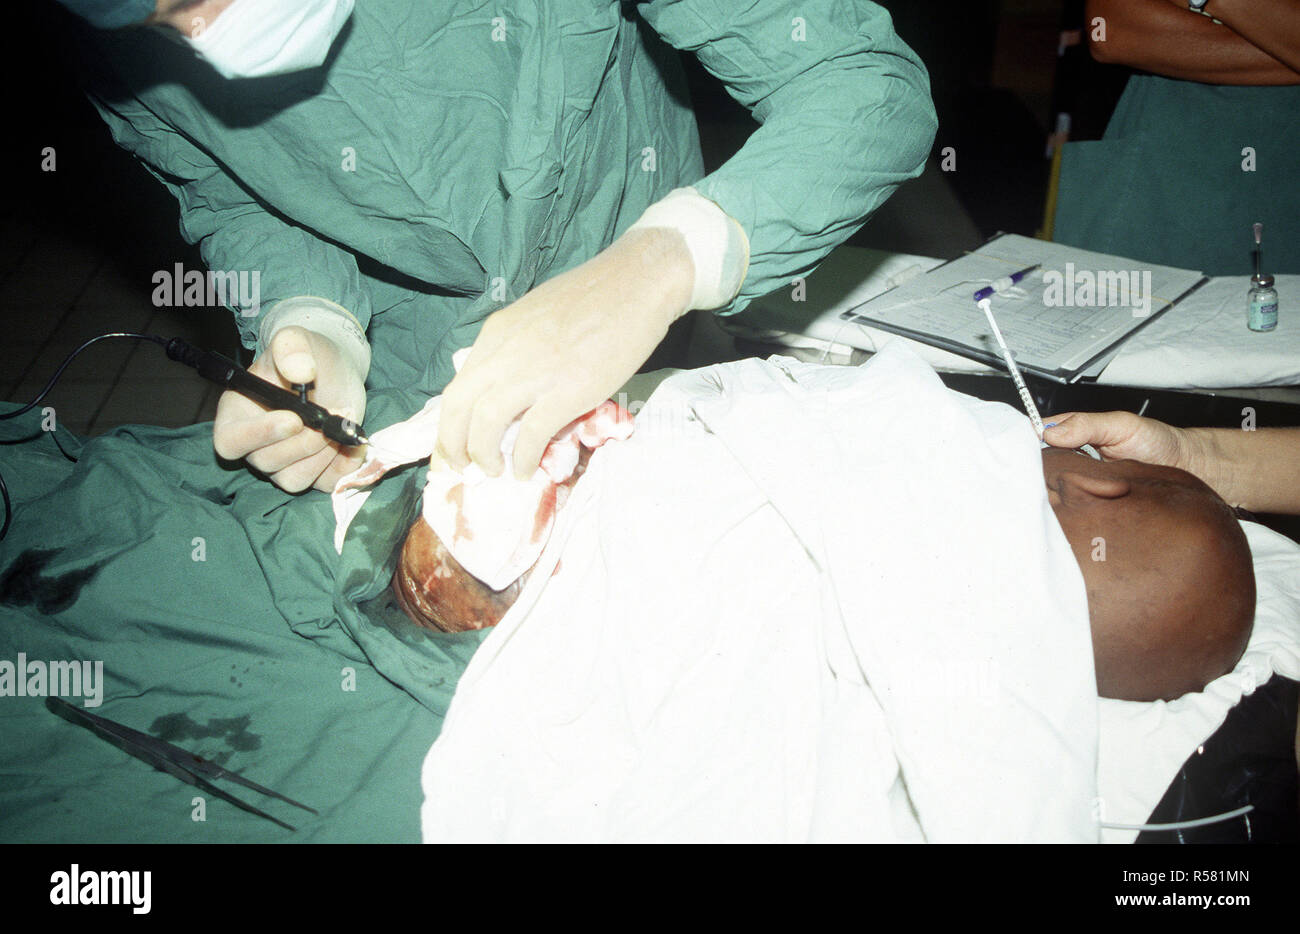 1993 - A doctor performs a skin graph on 2 1/2 year old Ali Salad Roble in the operating room of the Swedish hospital. (Mogadishu Somalia) Stock Photo